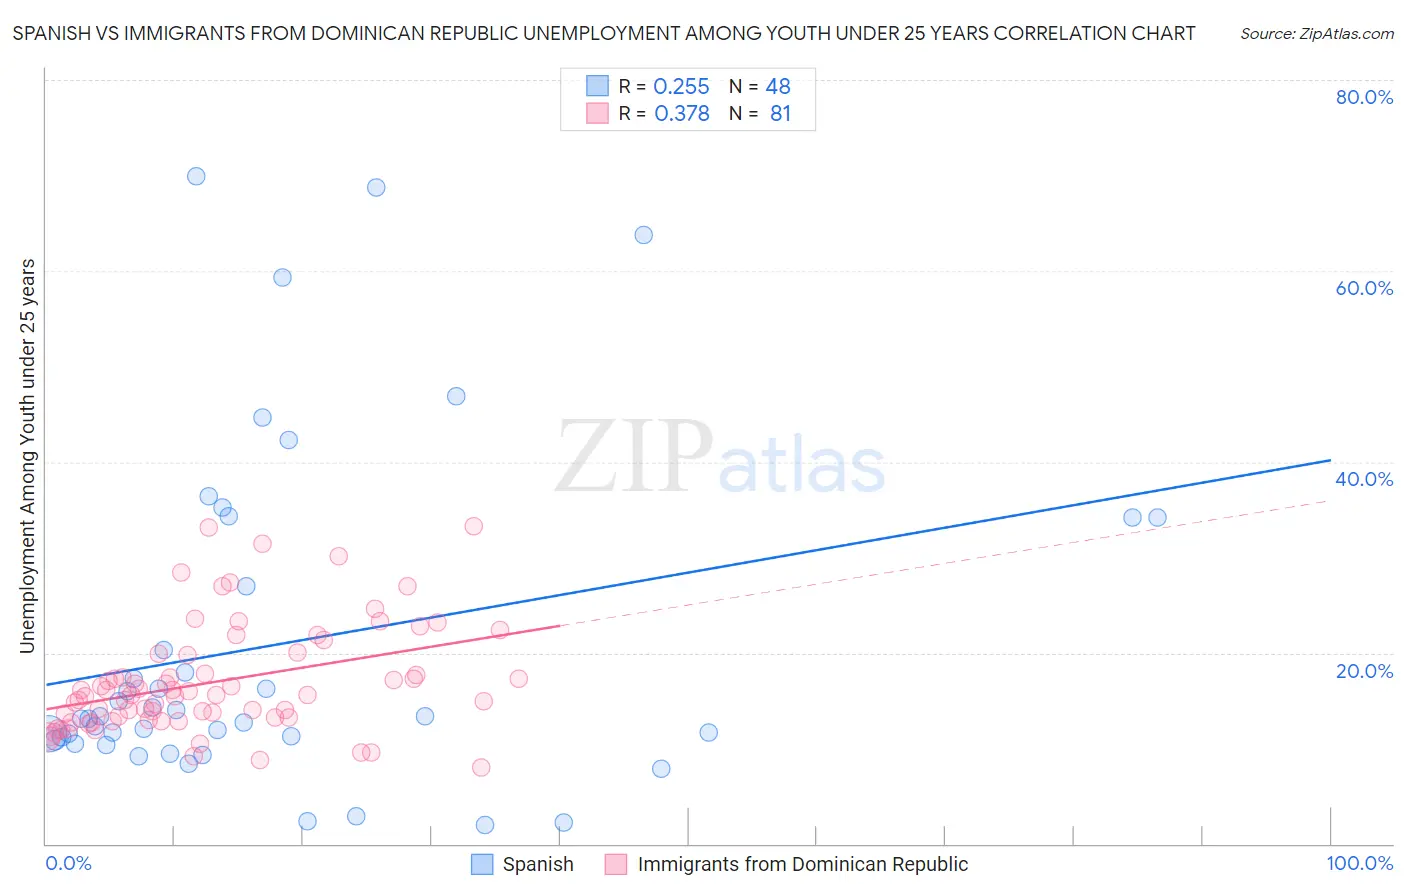 Spanish vs Immigrants from Dominican Republic Unemployment Among Youth under 25 years